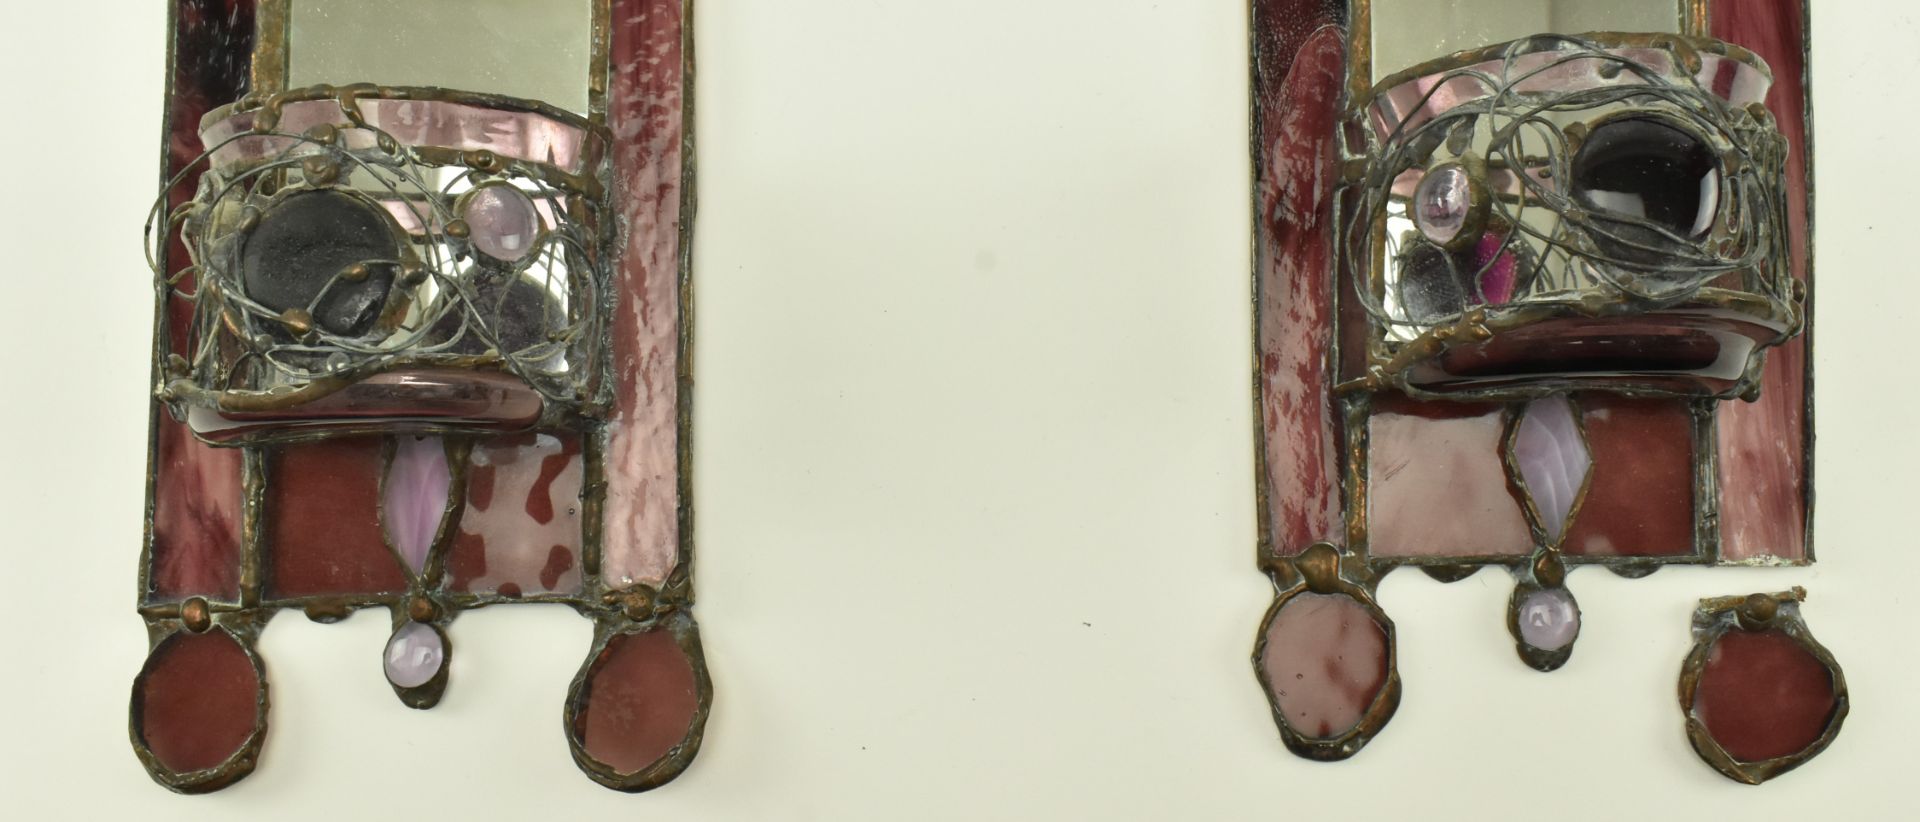 JOHN LEATHWOOD - PAIR OF STAINED LEADED GLASS WALL SCONCES - Image 4 of 8